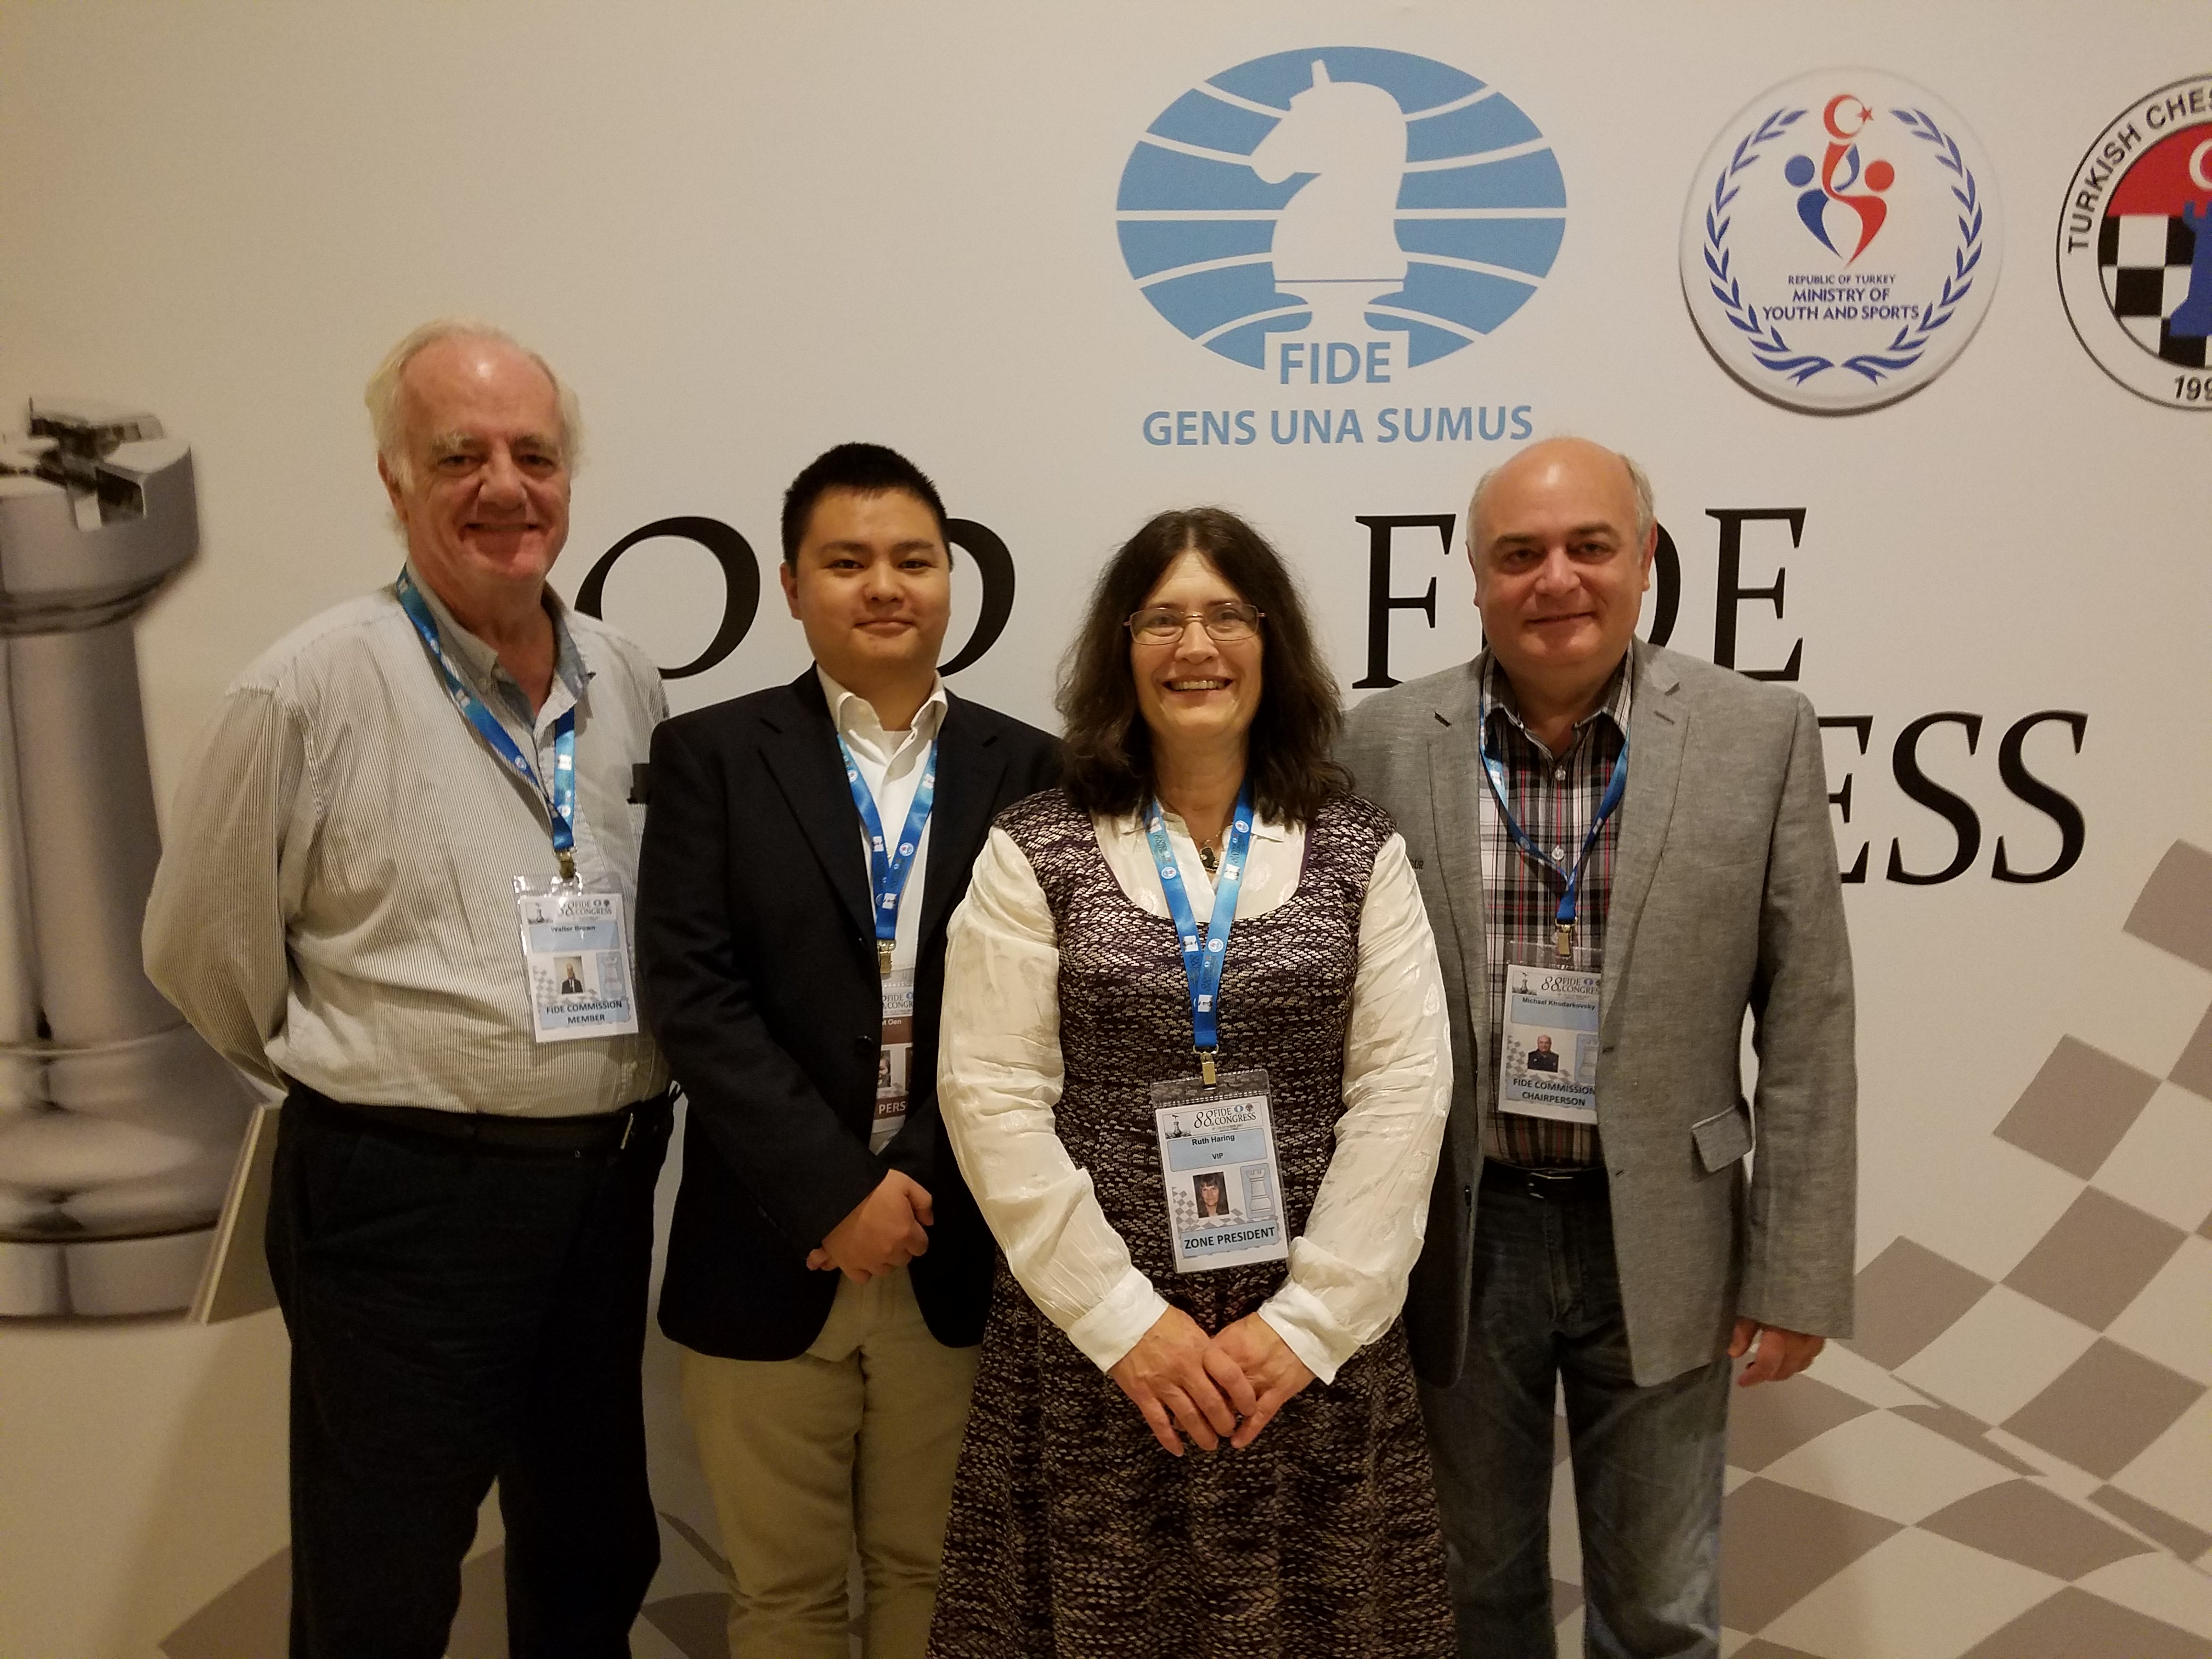 Estimate USCF Rating from FIDE and CFC Ratings